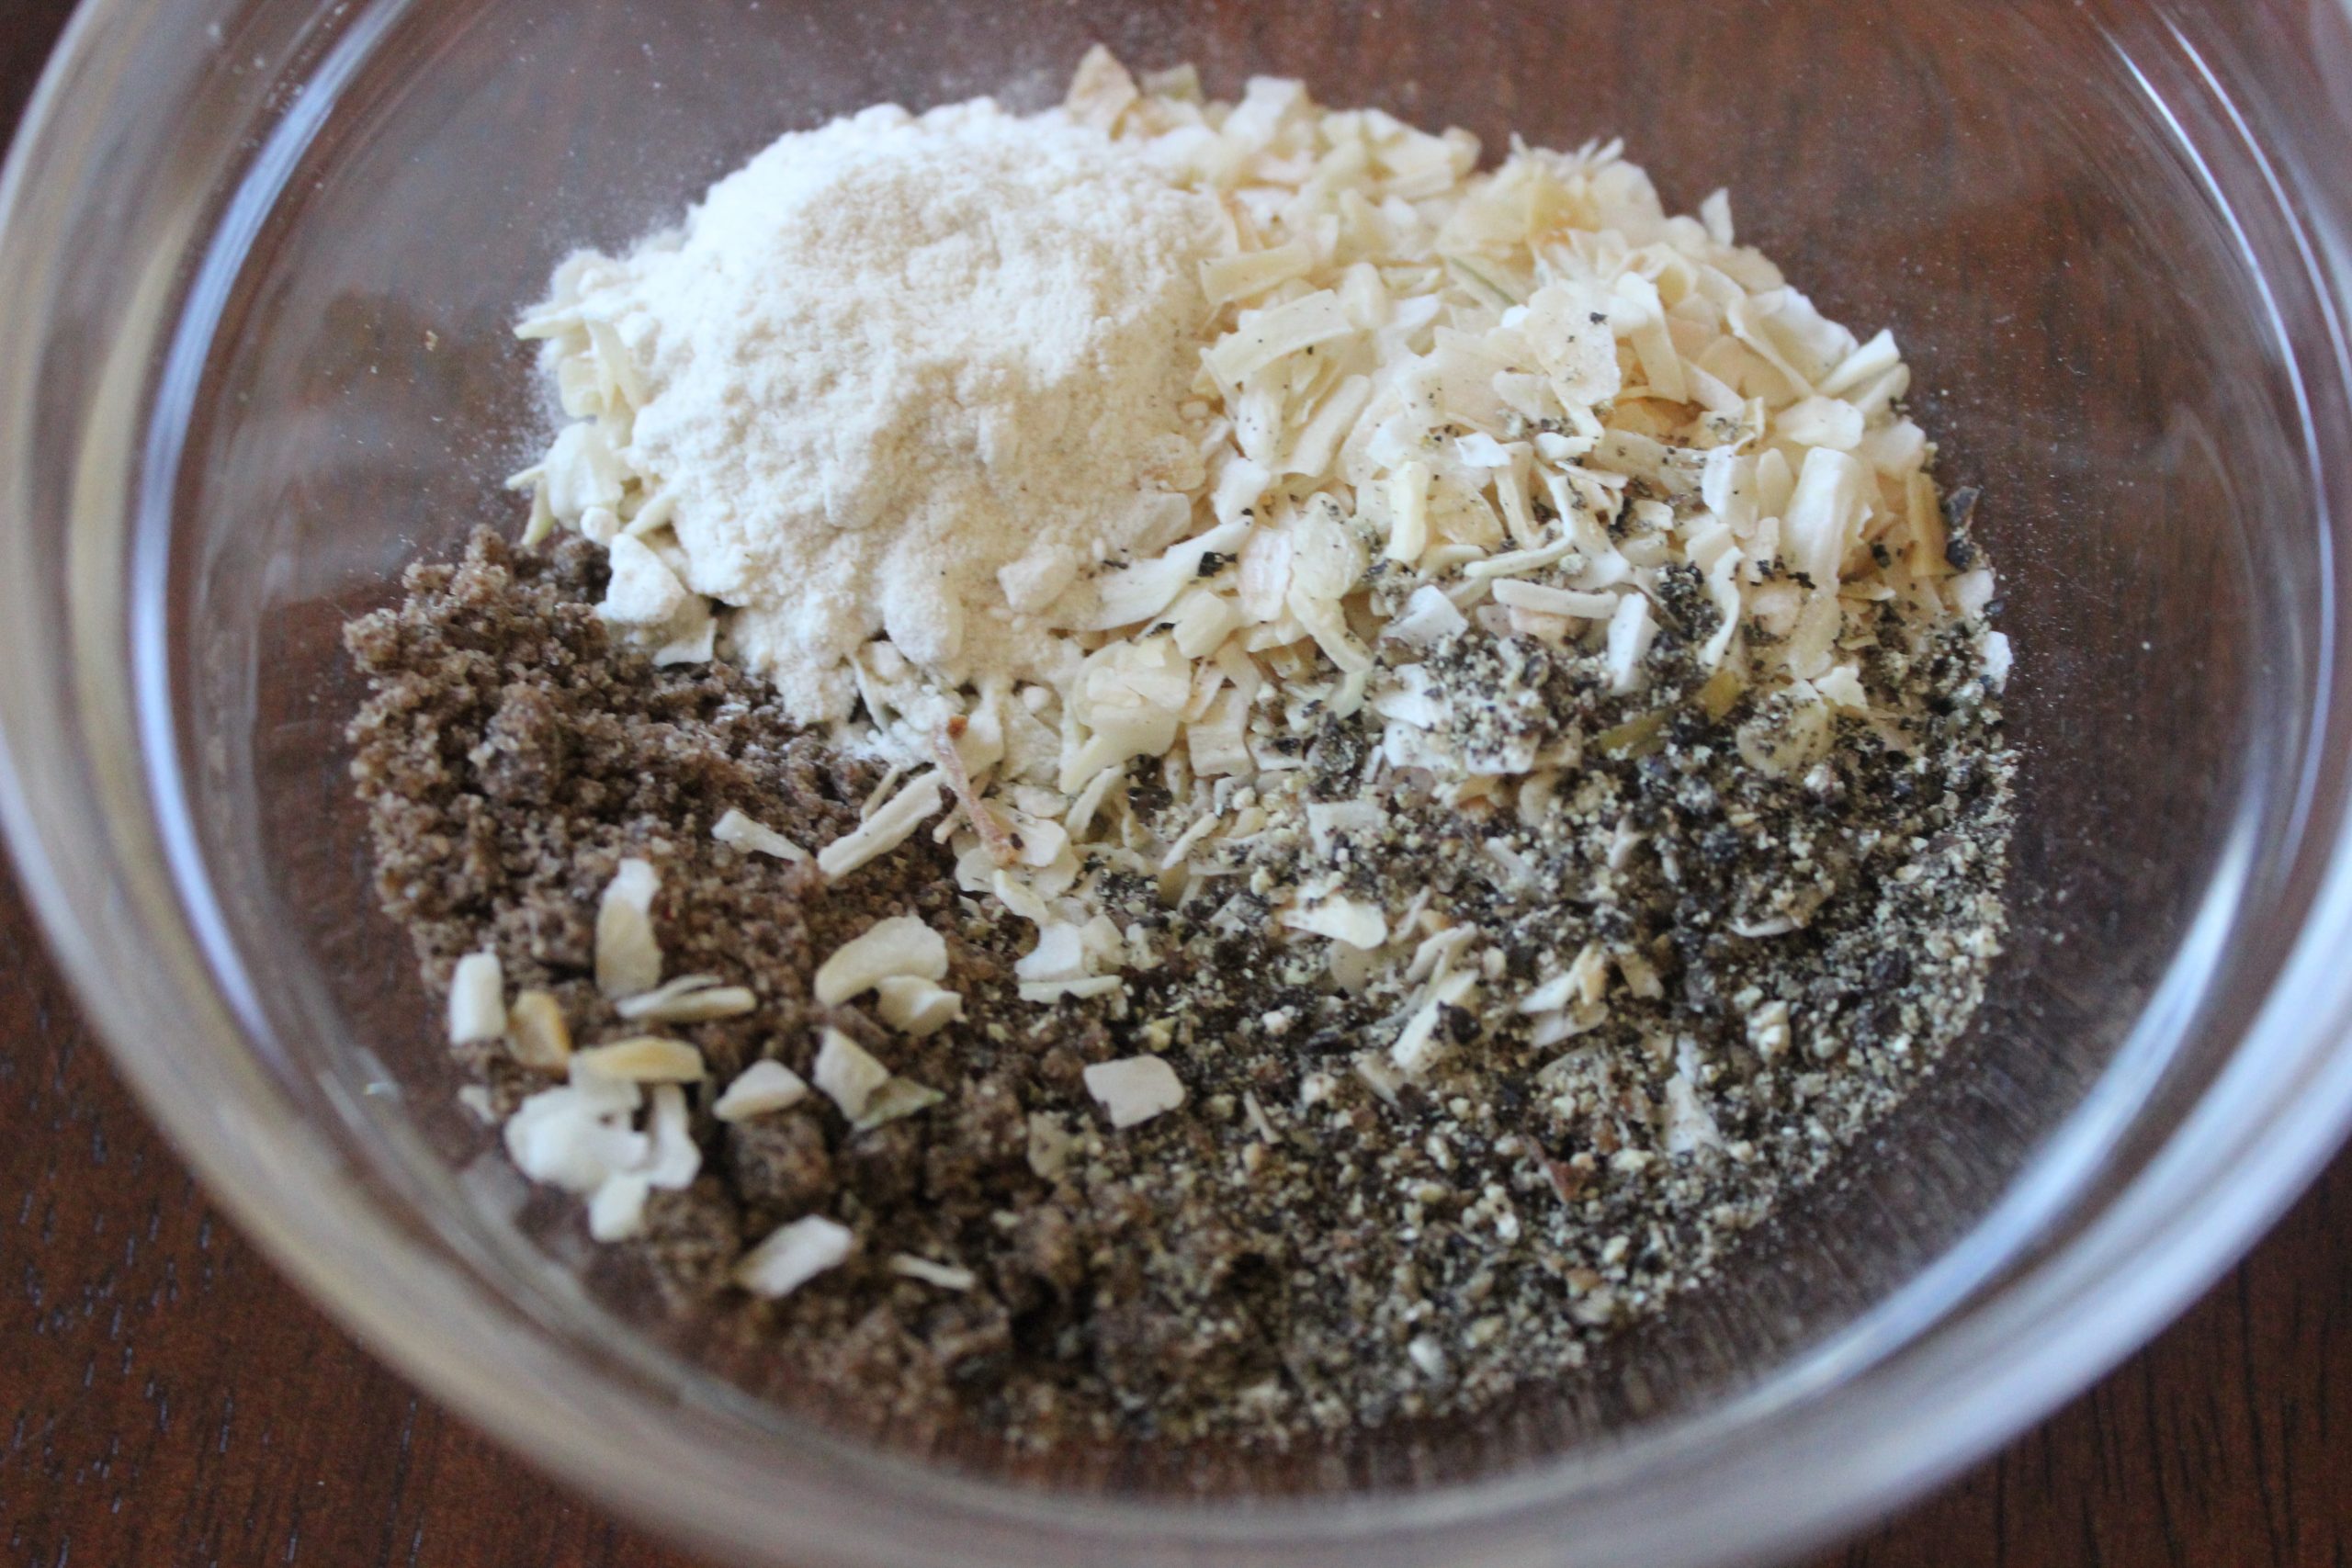 â± The Best HOMEMADE DRY ONION SOUP MIX